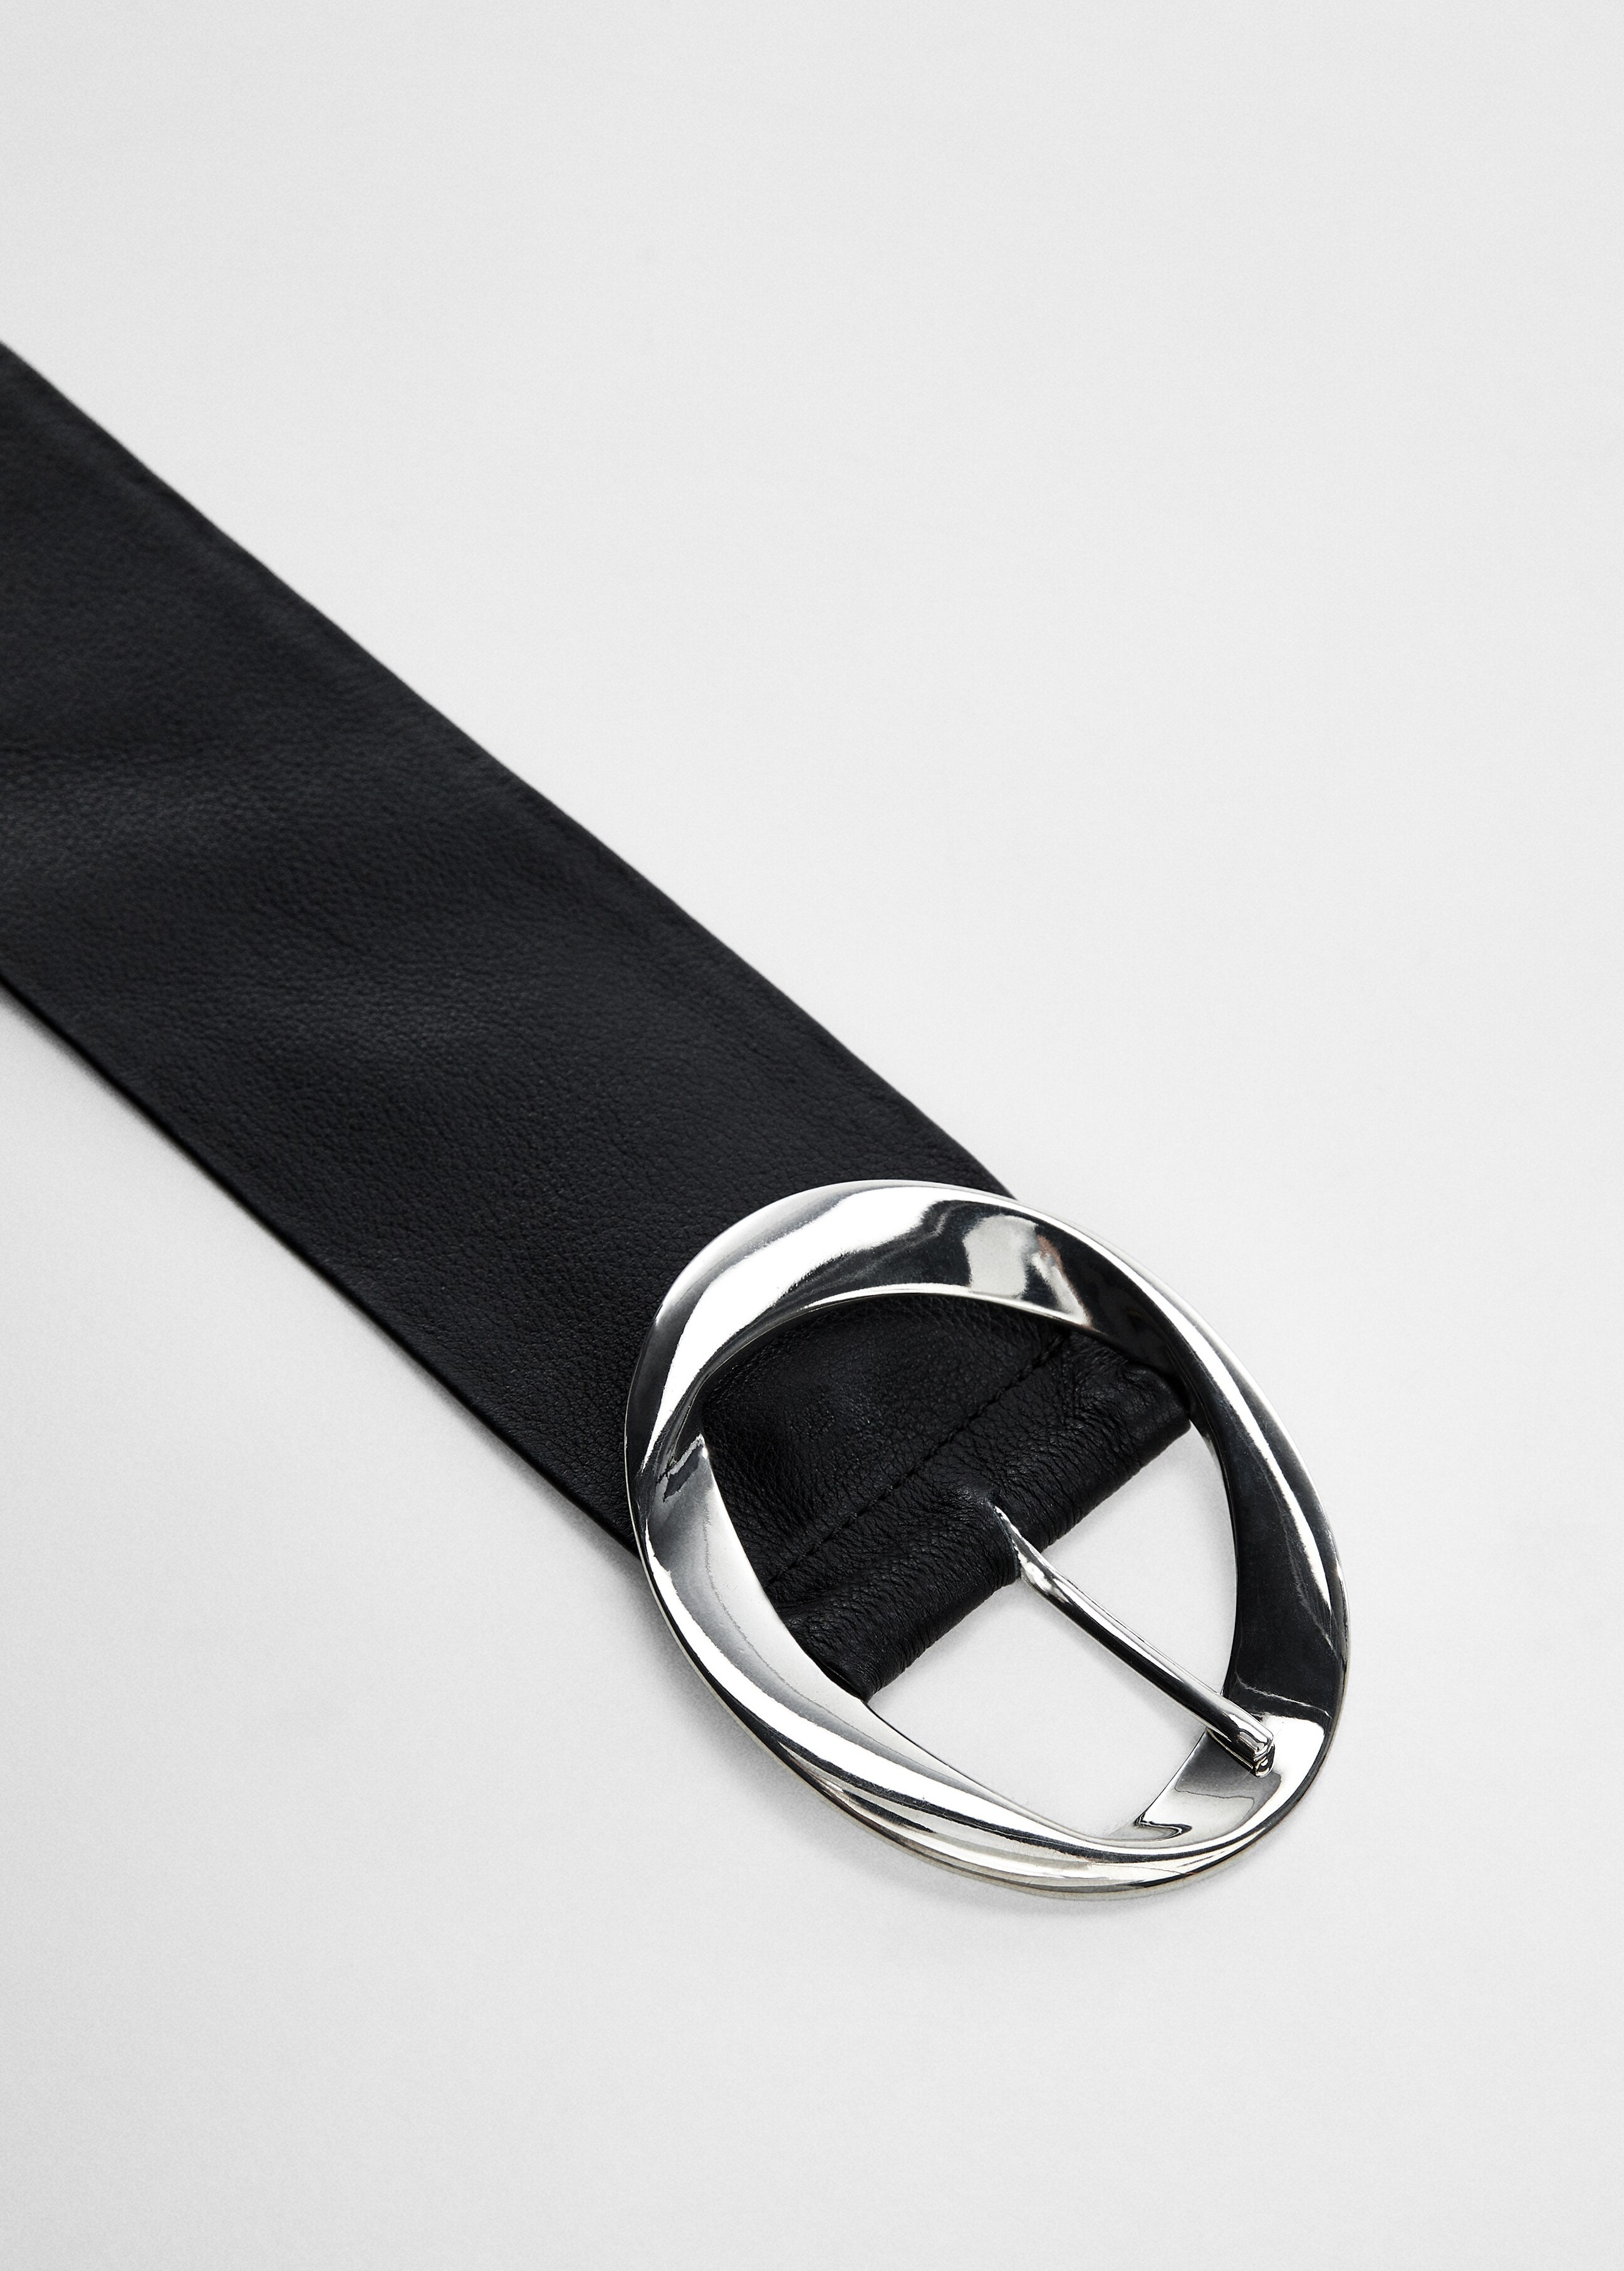 Wide leather belt - Details of the article 3